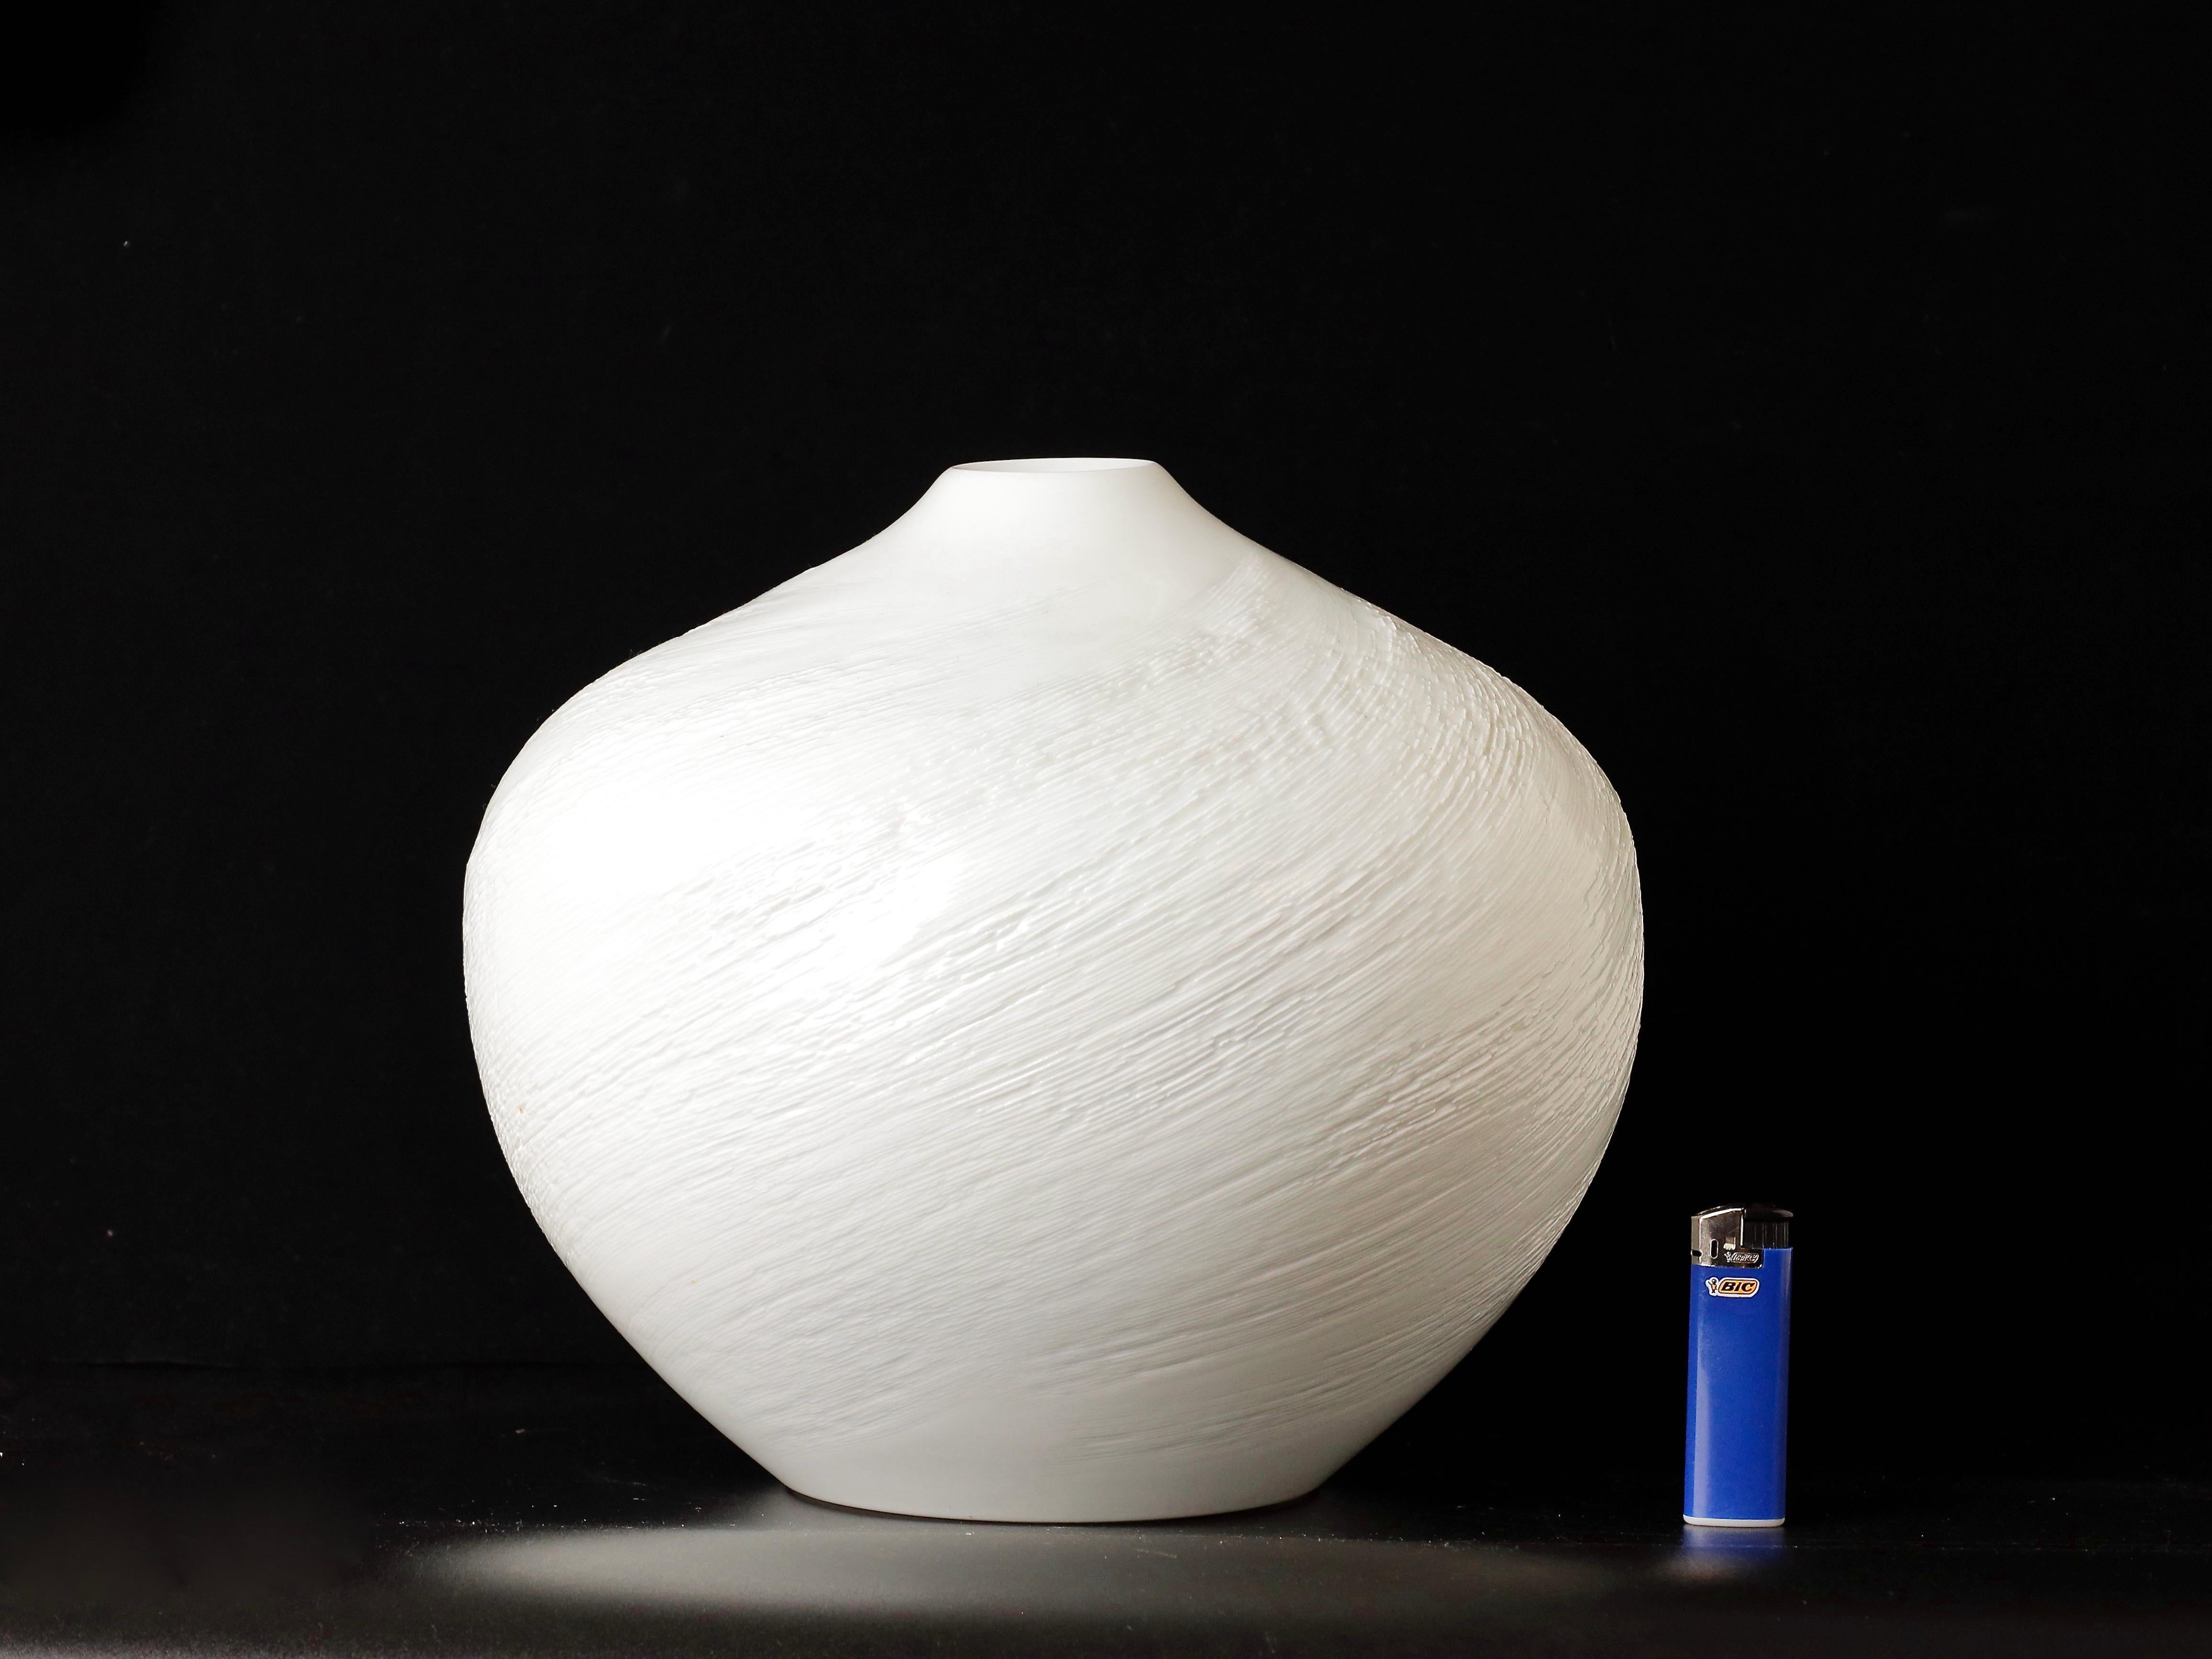 Introducing a breathtaking contemporary Japanese vase crafted by the renowned porcelain artist Yasushi, who worked in Arita during the mid to late 20th century. This magnificent piece stands at an impressive 12 inches in height and measures 10